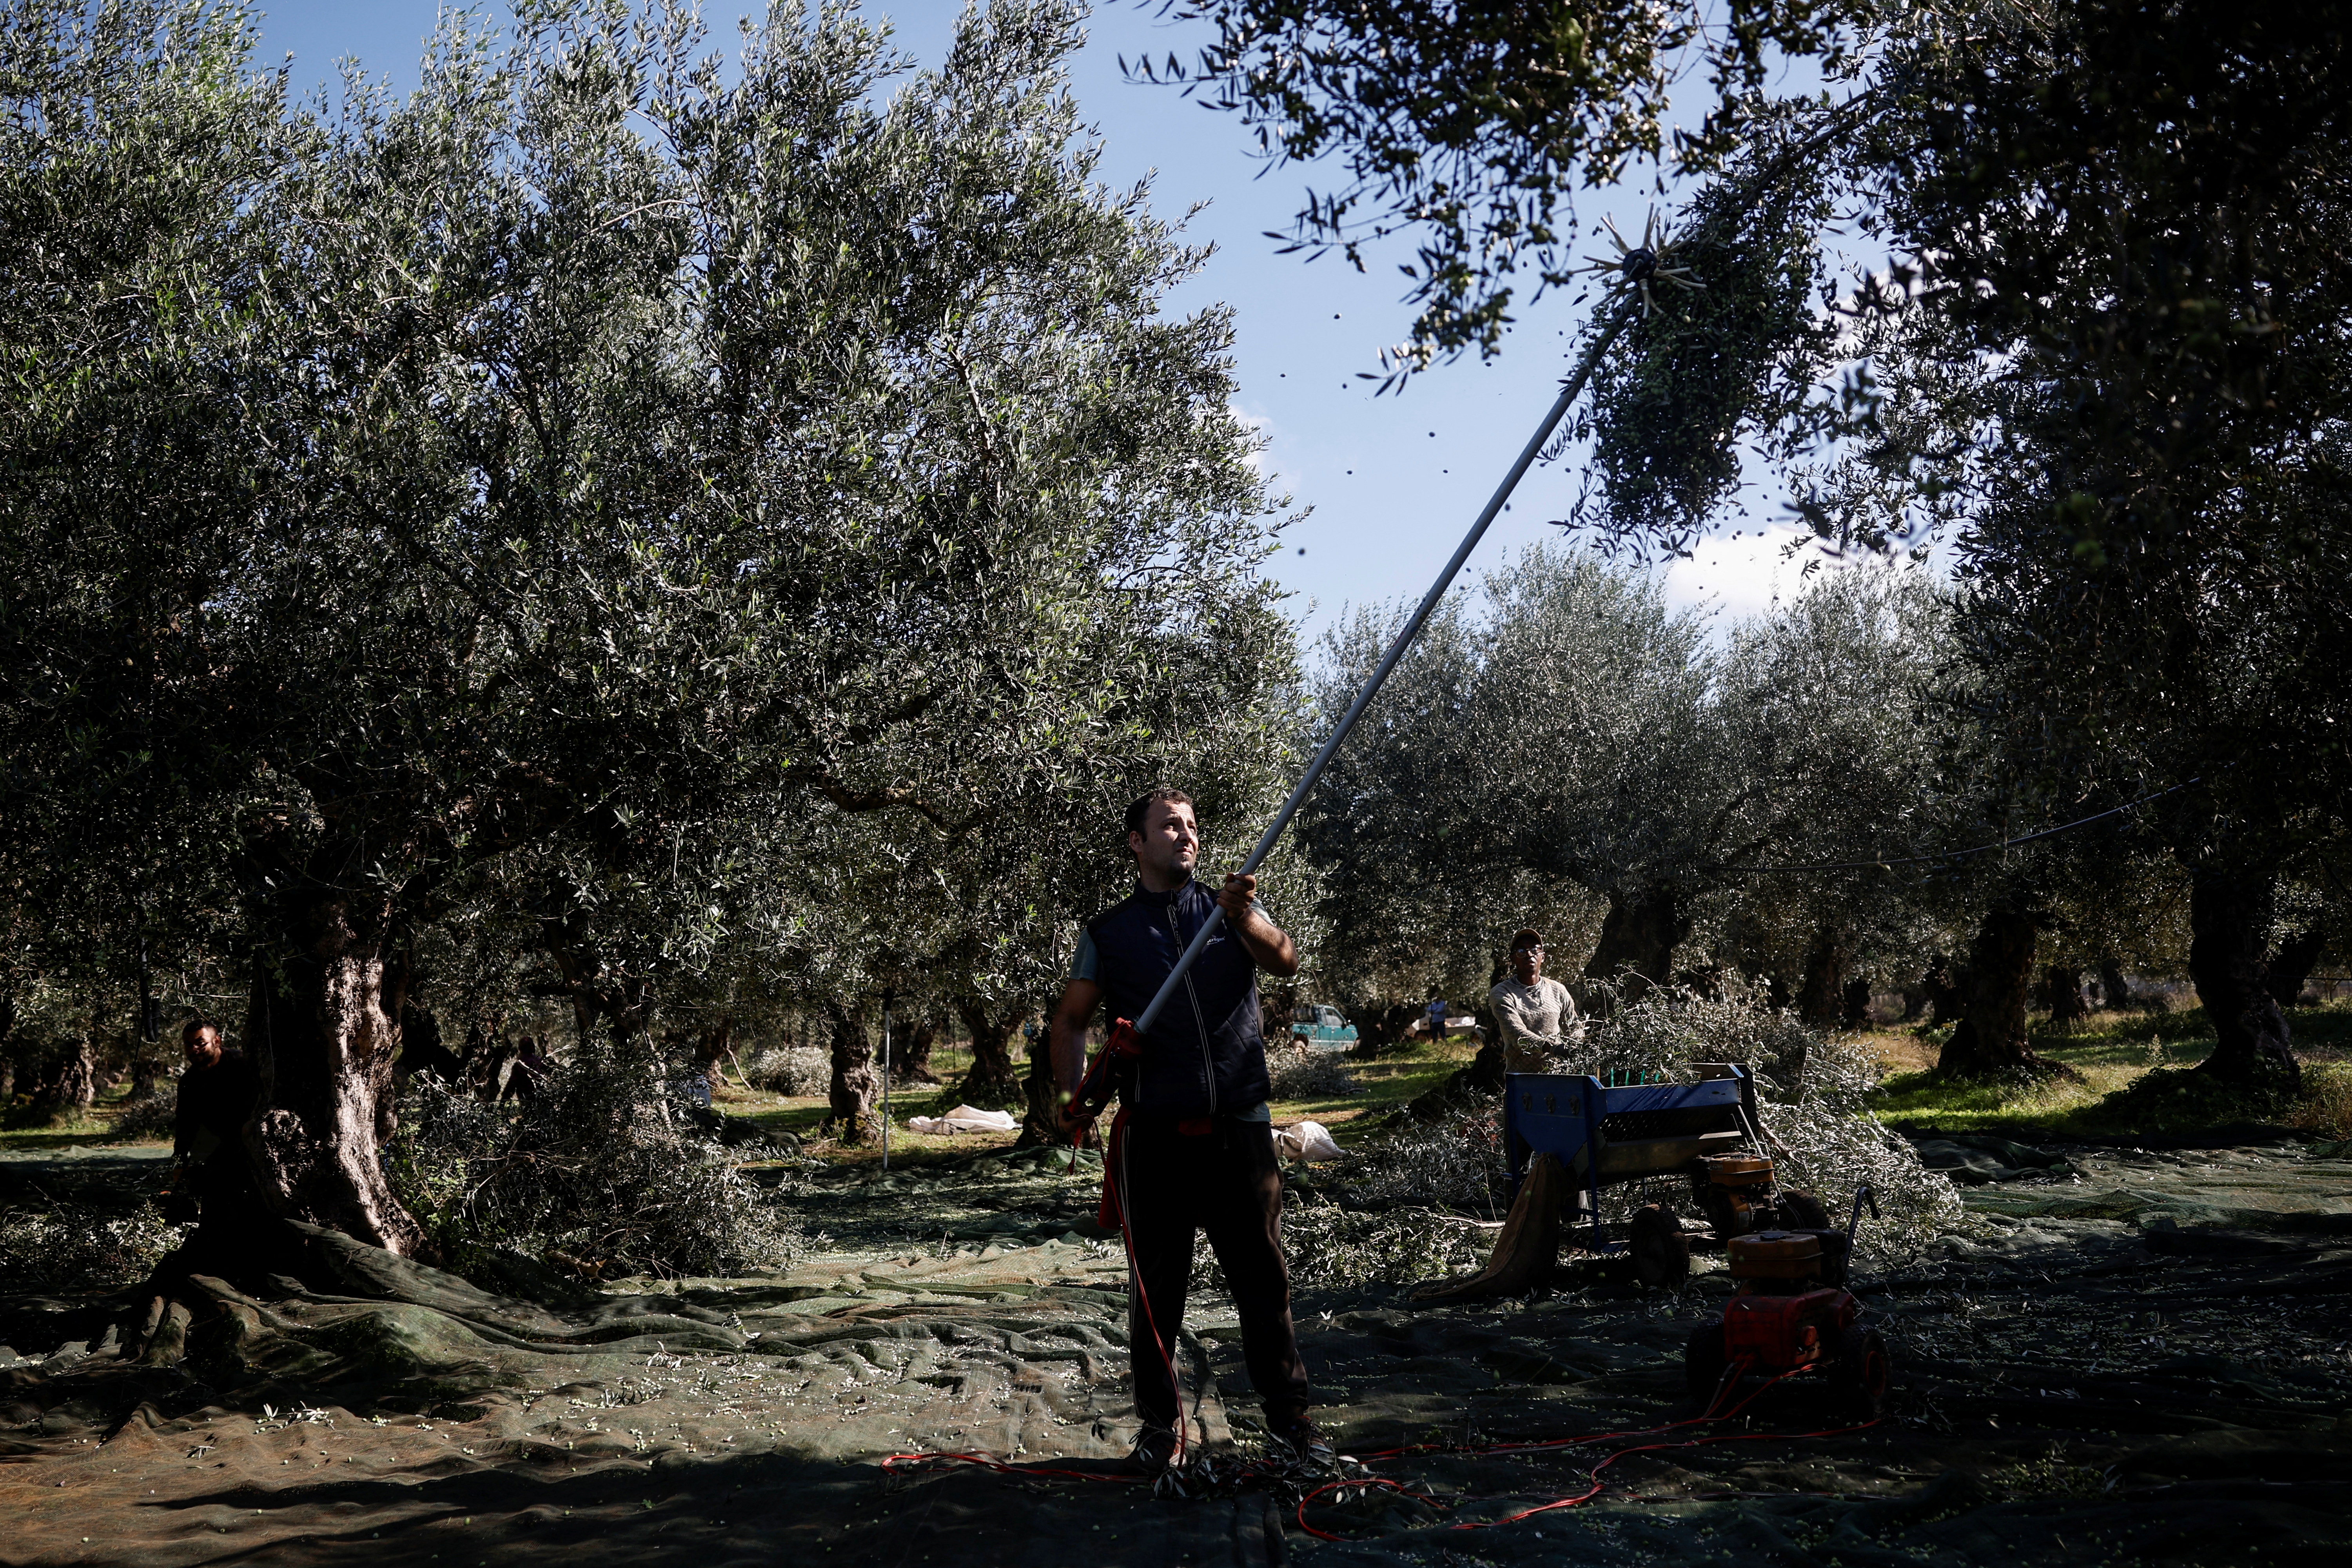 Greek olive growers brace themselves as thieves lurk for pricey crop